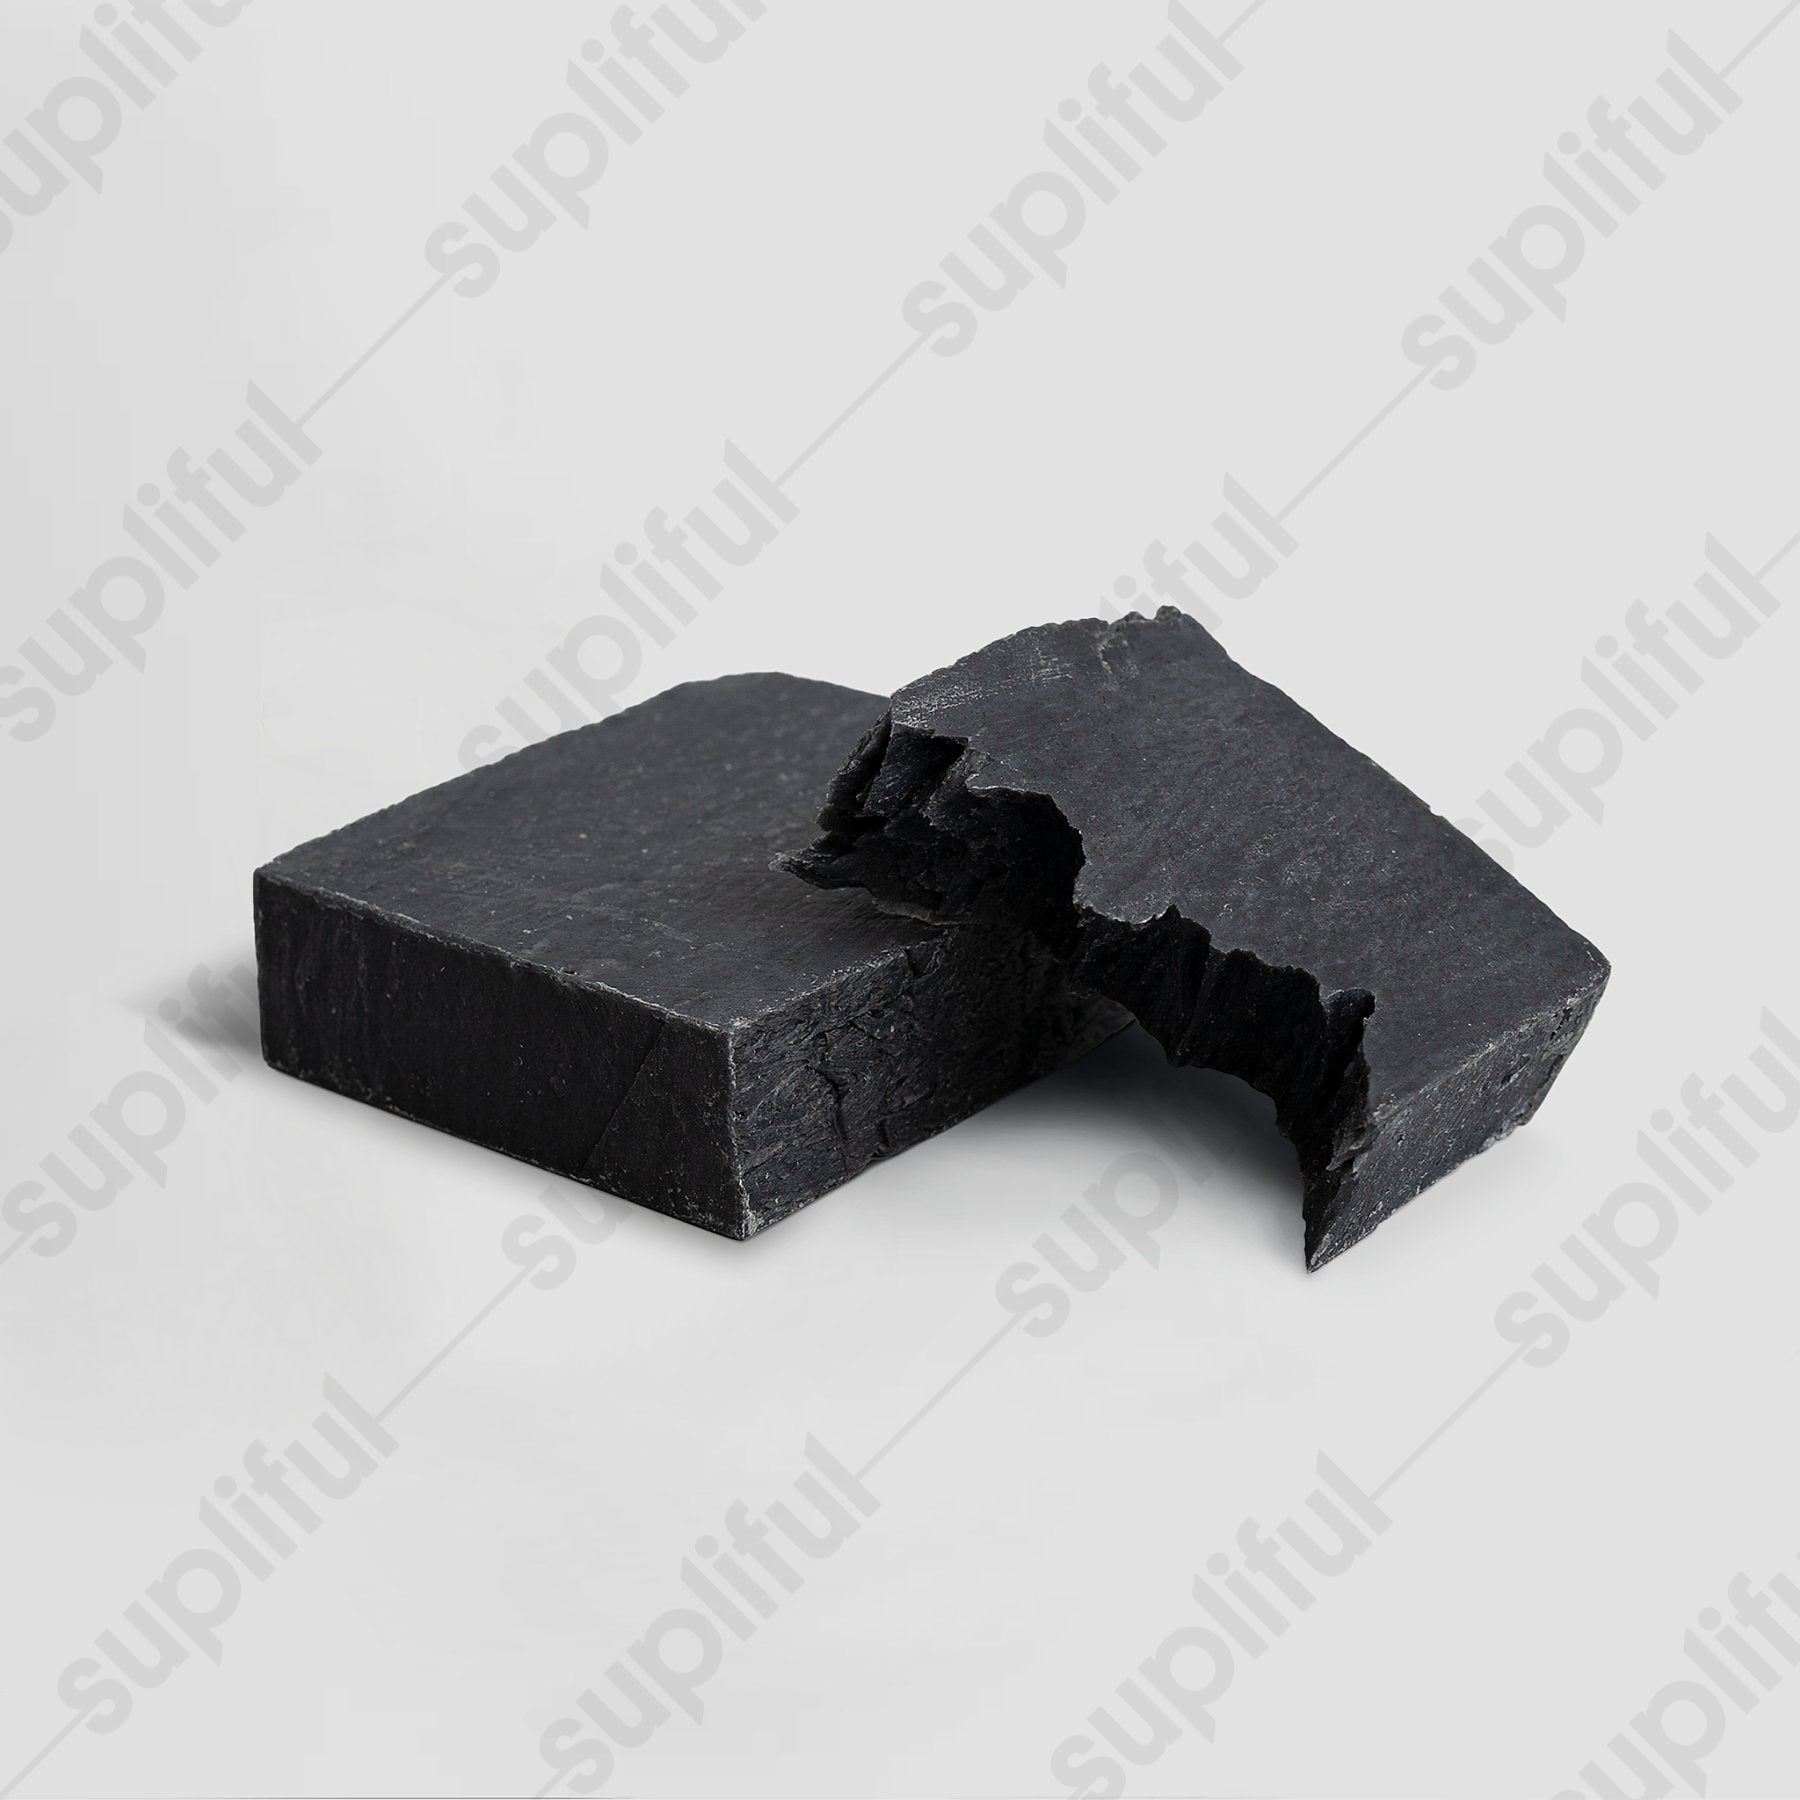 Charcoal Soap - Ships exclusively to US - Premium Charcoal Soap from Concordia Style Boutique - Just $14.75! Shop now at Concordia Style Boutique